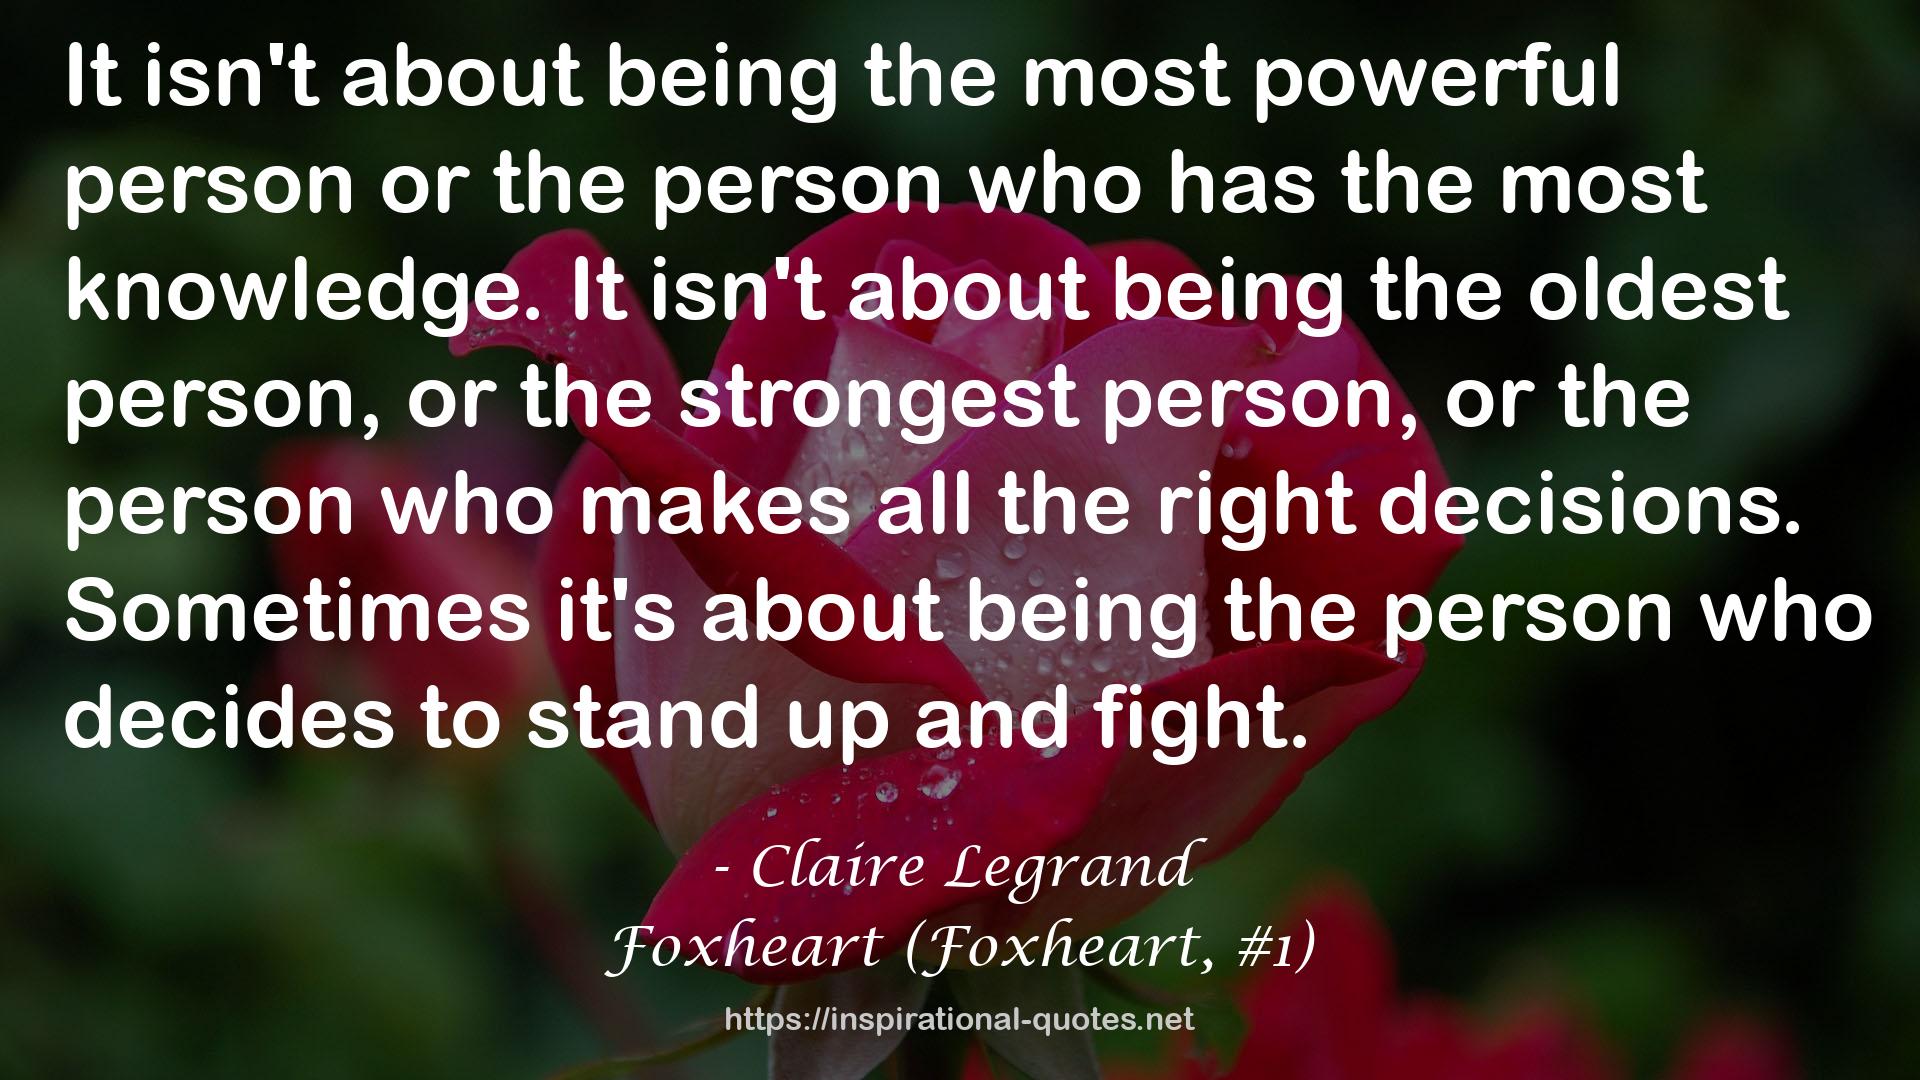 Foxheart (Foxheart, #1) QUOTES